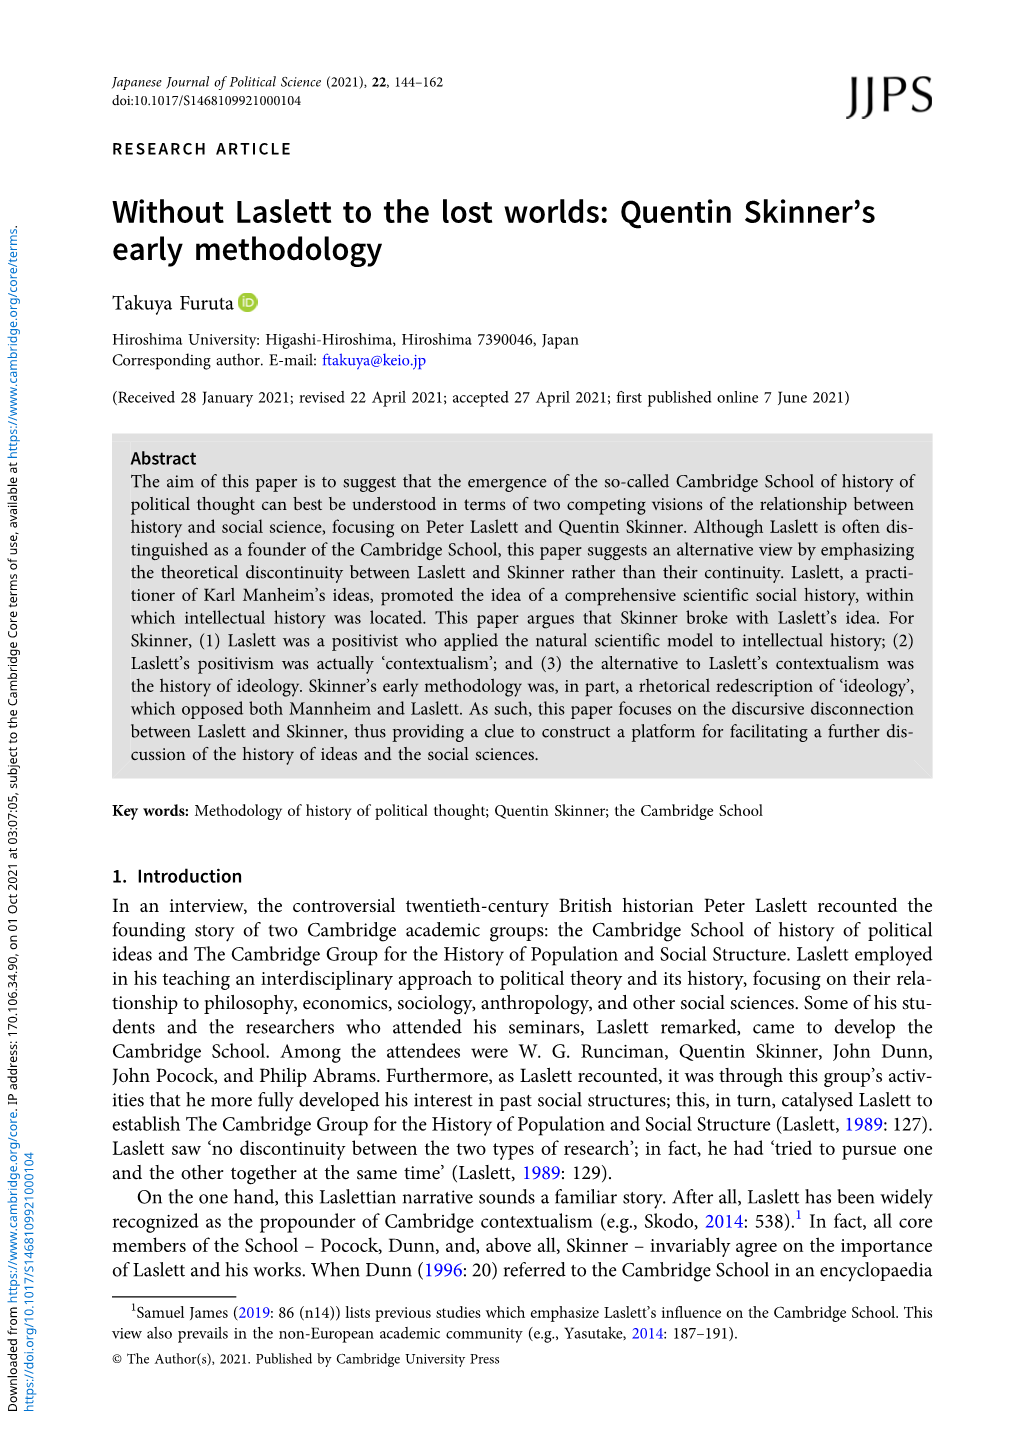 Without Laslett to the Lost Worlds: Quentin Skinner's Early Methodology